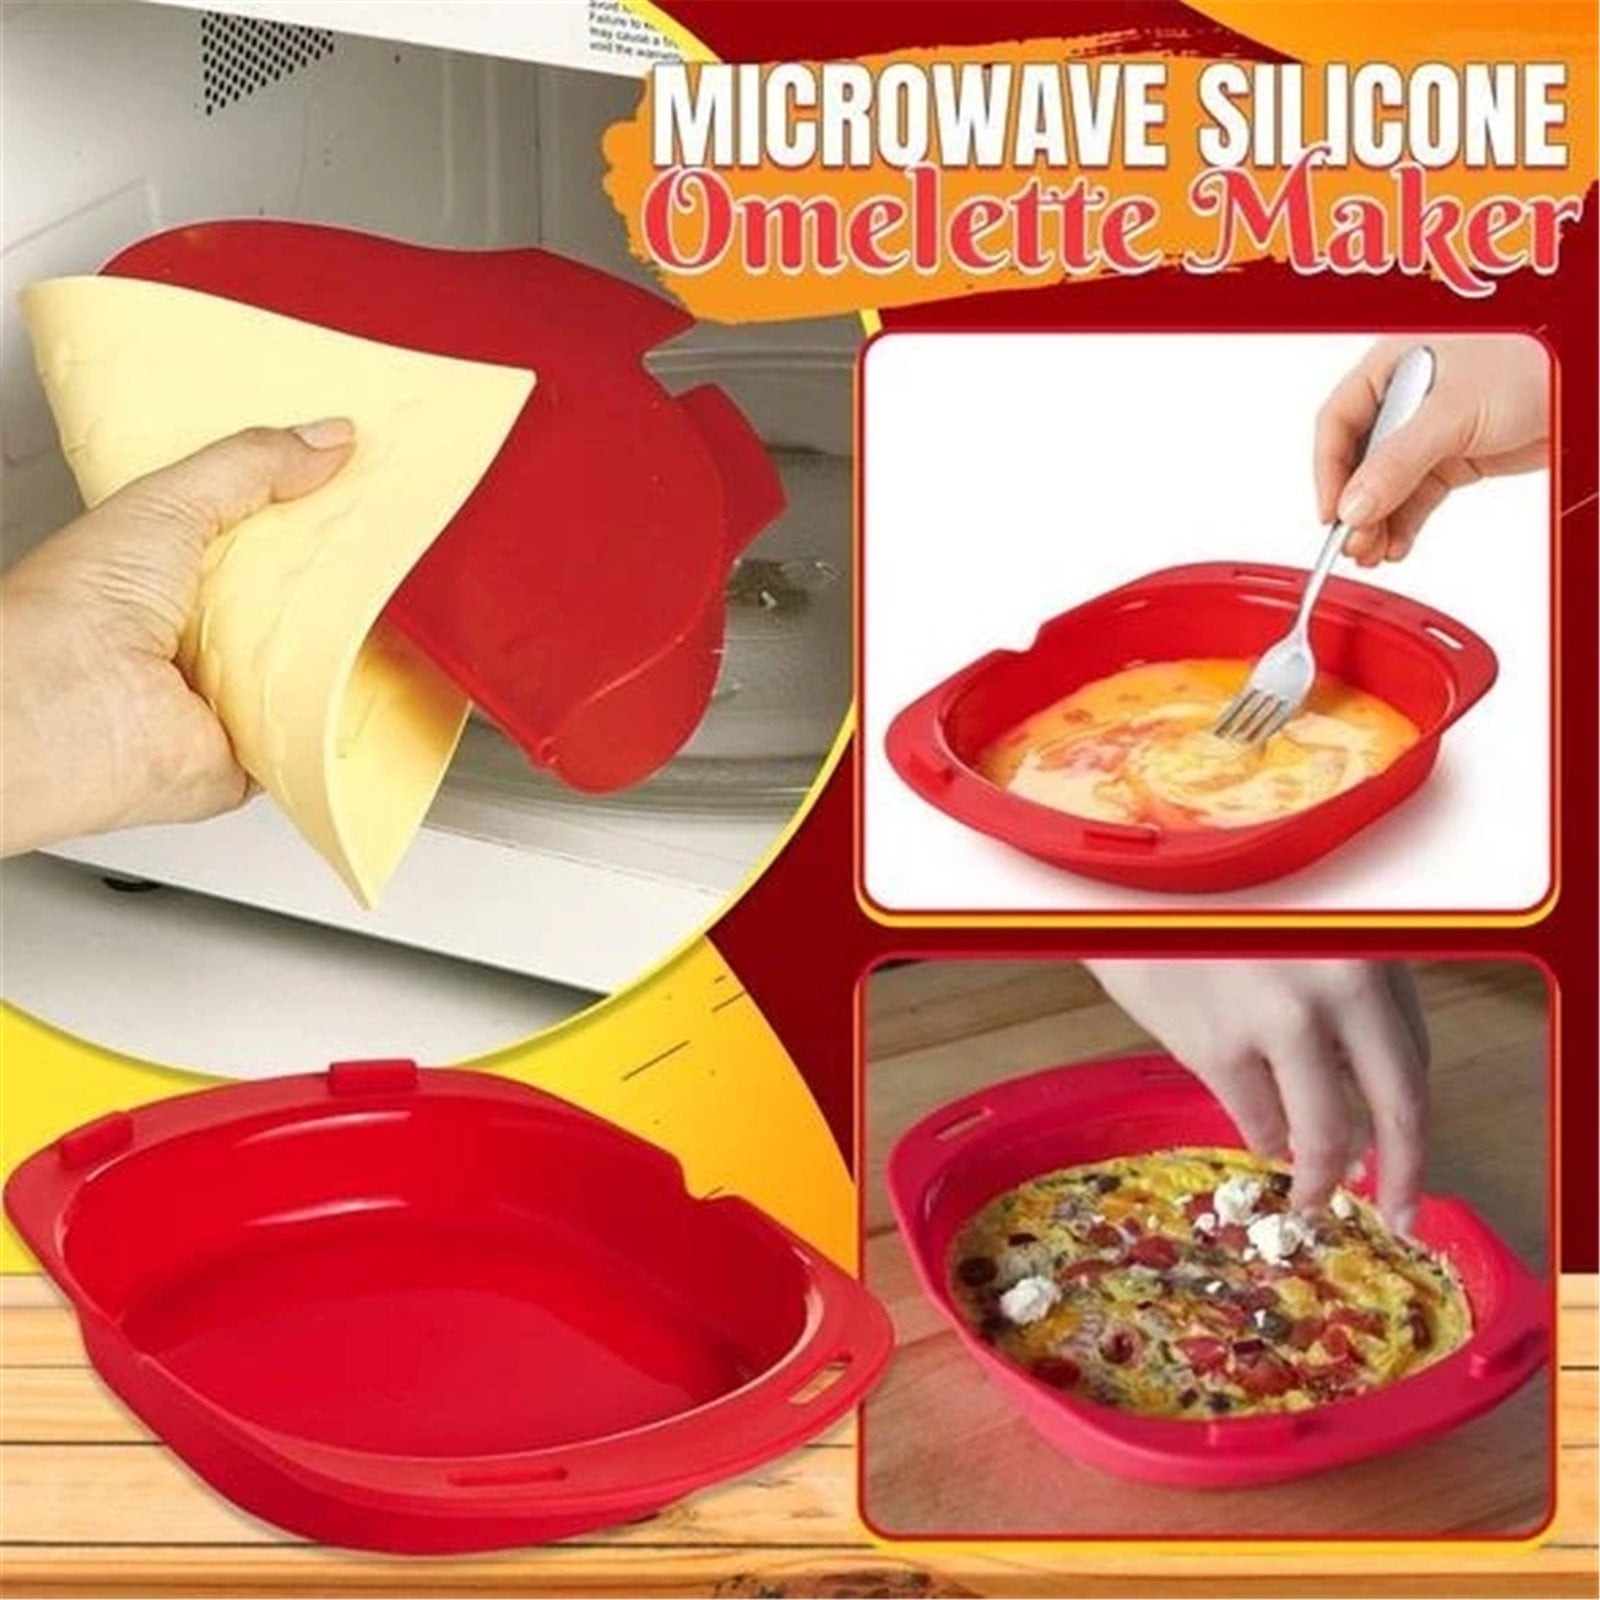 Omelet Maker Pan AS SEEN ON TV Products